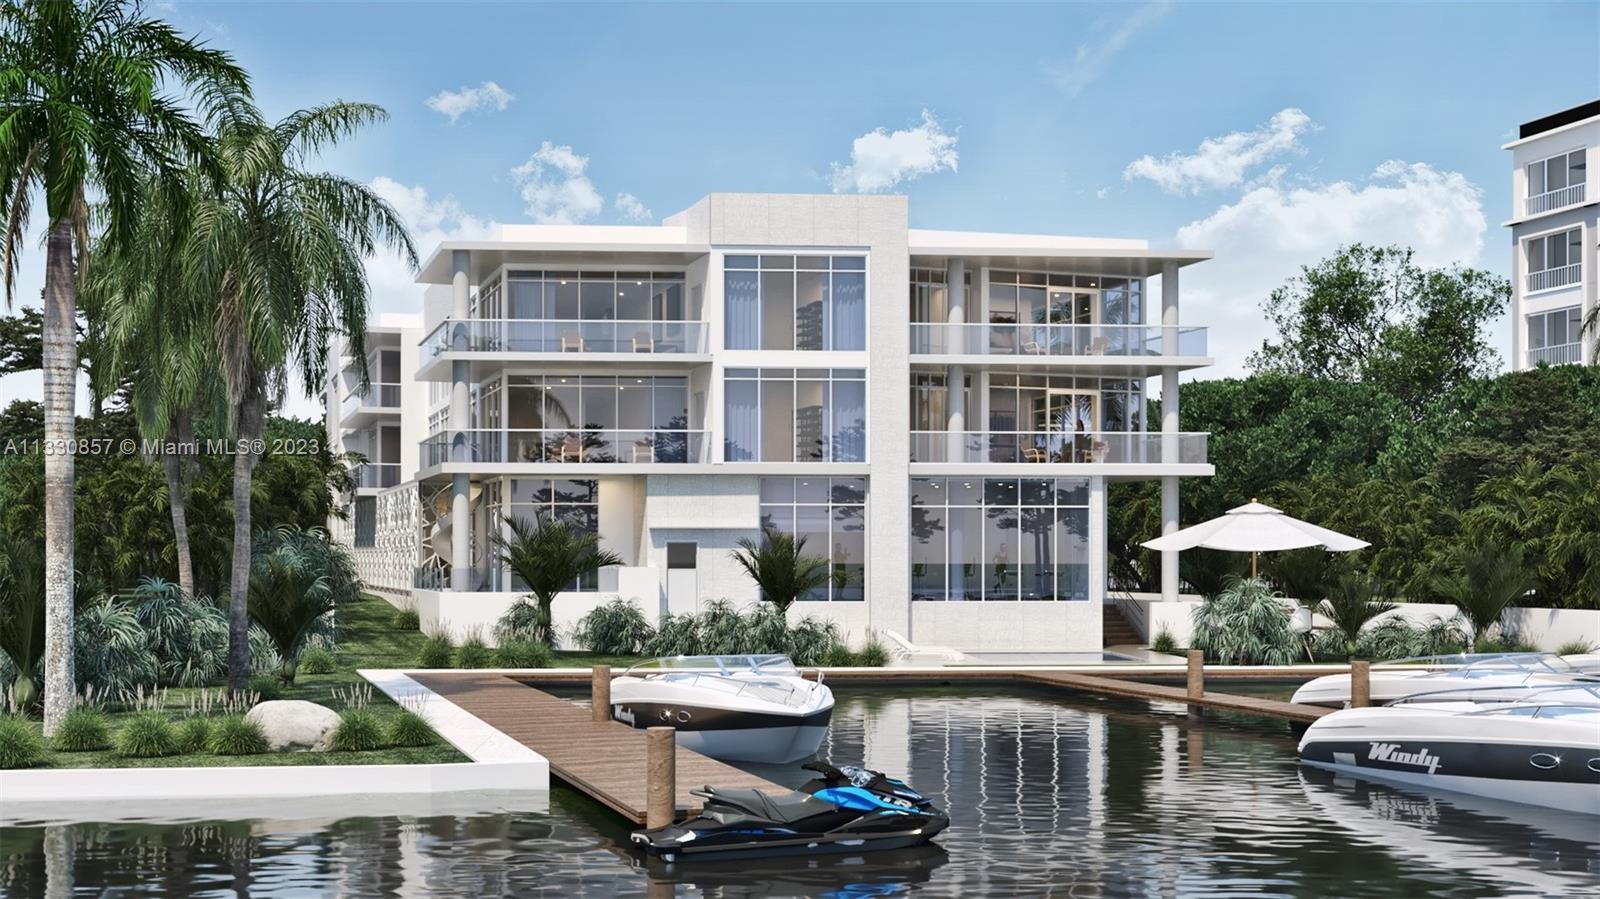 Marina del Río residences, a new boutique waterfront development consisting of 10 beautifully appoin